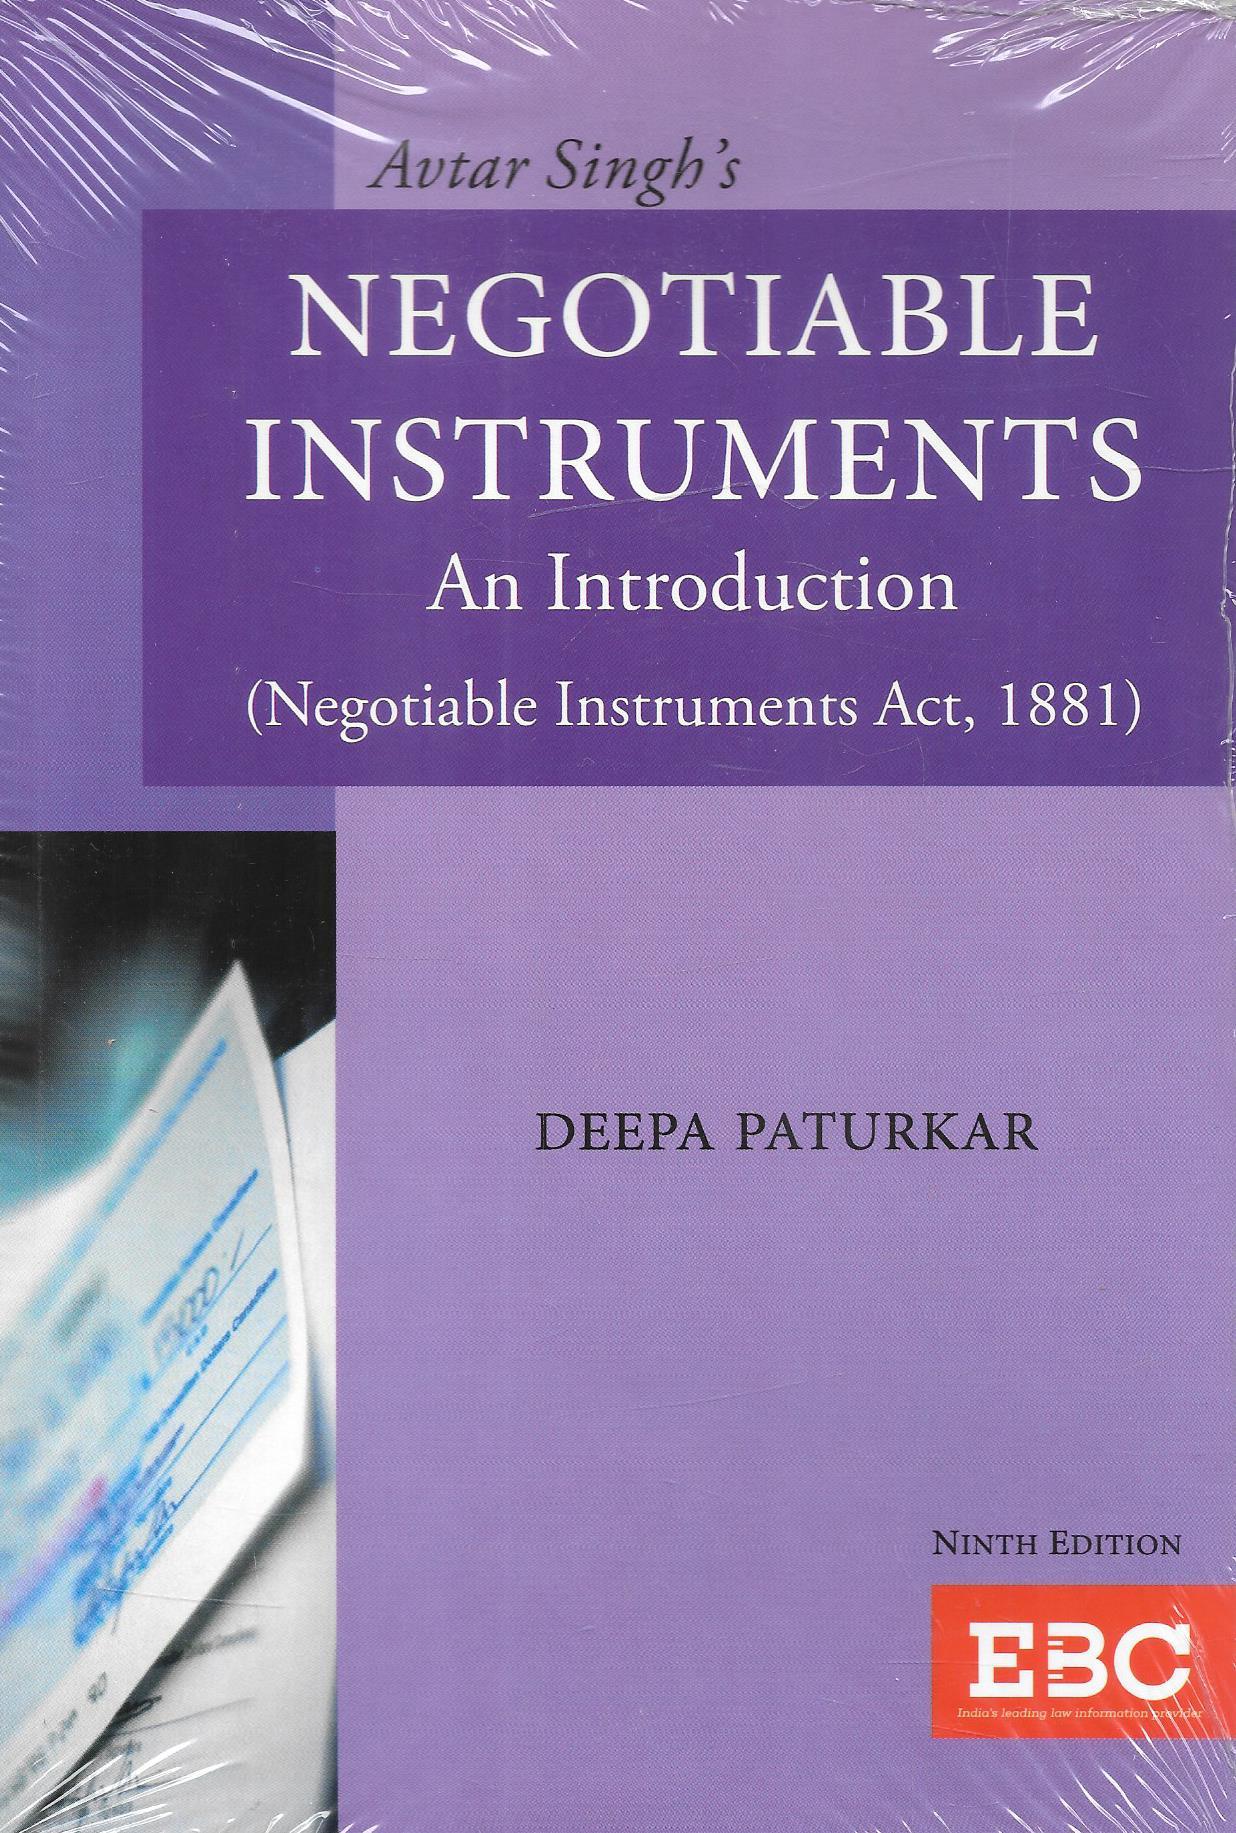 Avtar Singh's Negotiable Instruments: An Introduction